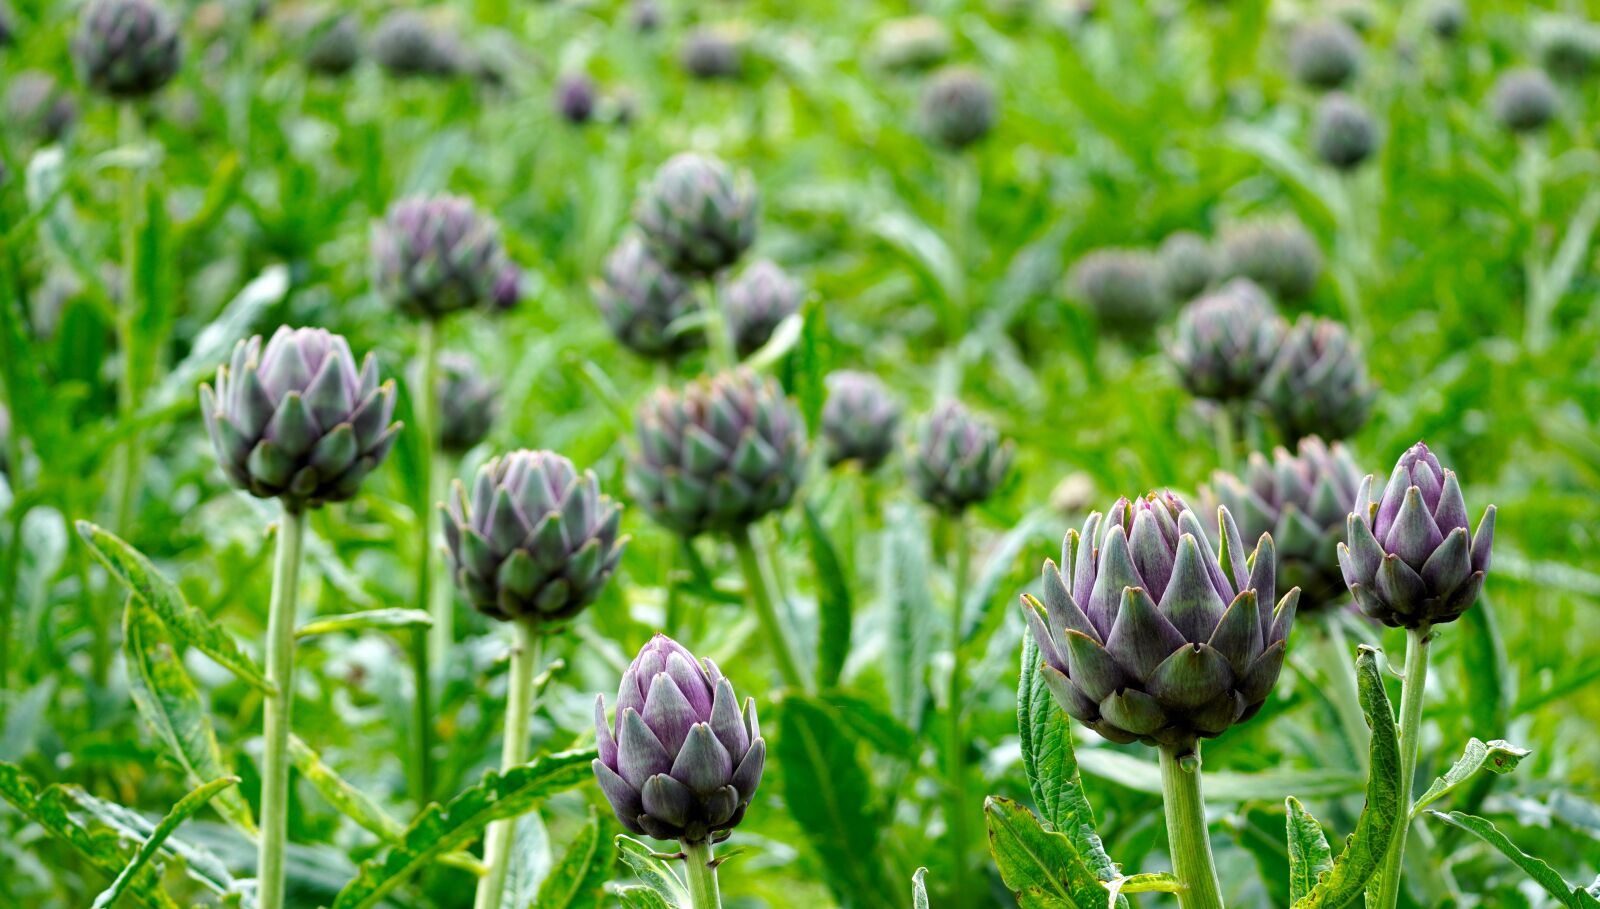 Sony a6400 sample photo. Artichokes, field, vegetables photography